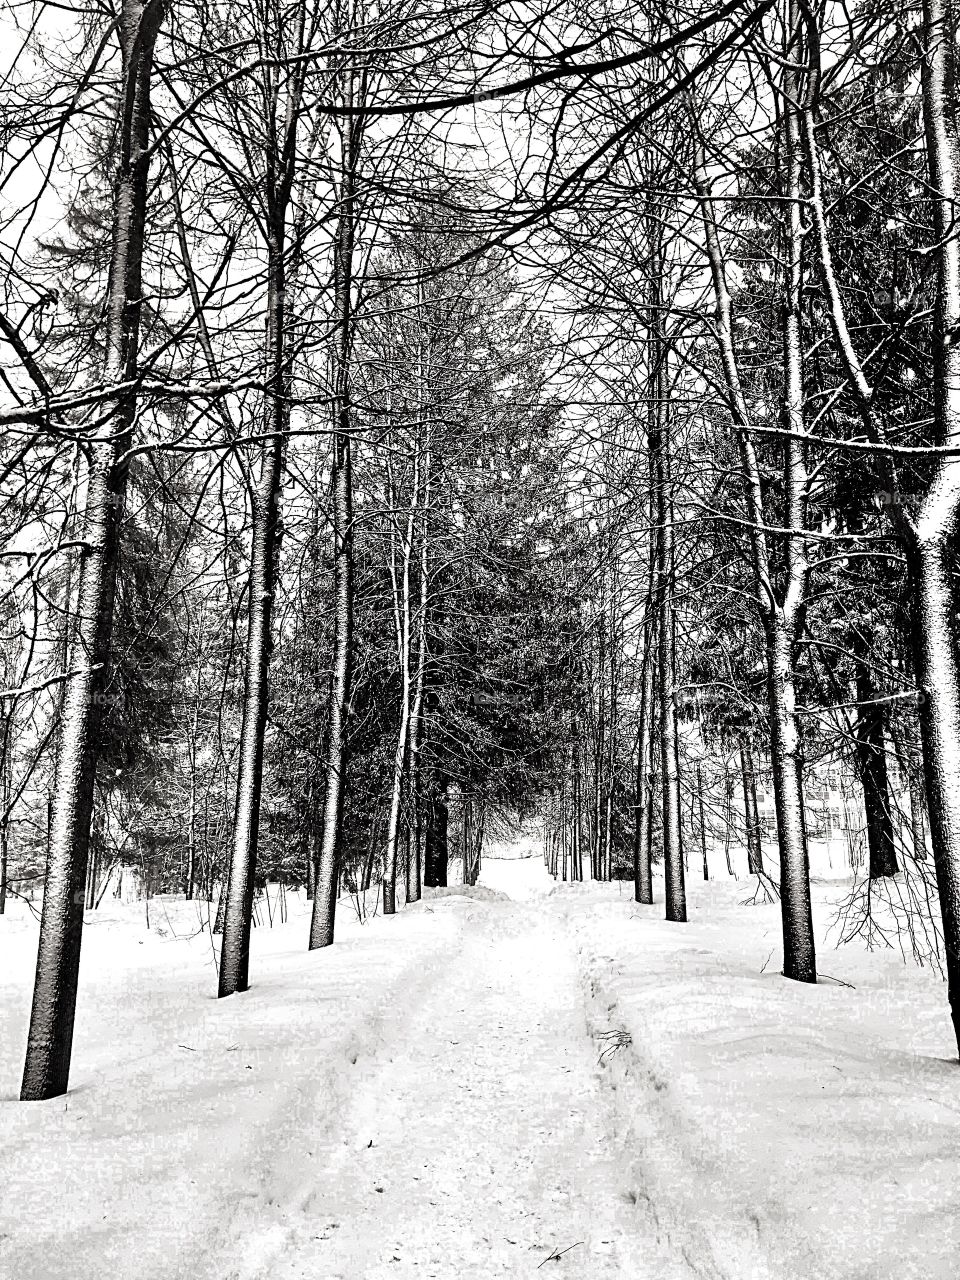 road in the winter forest